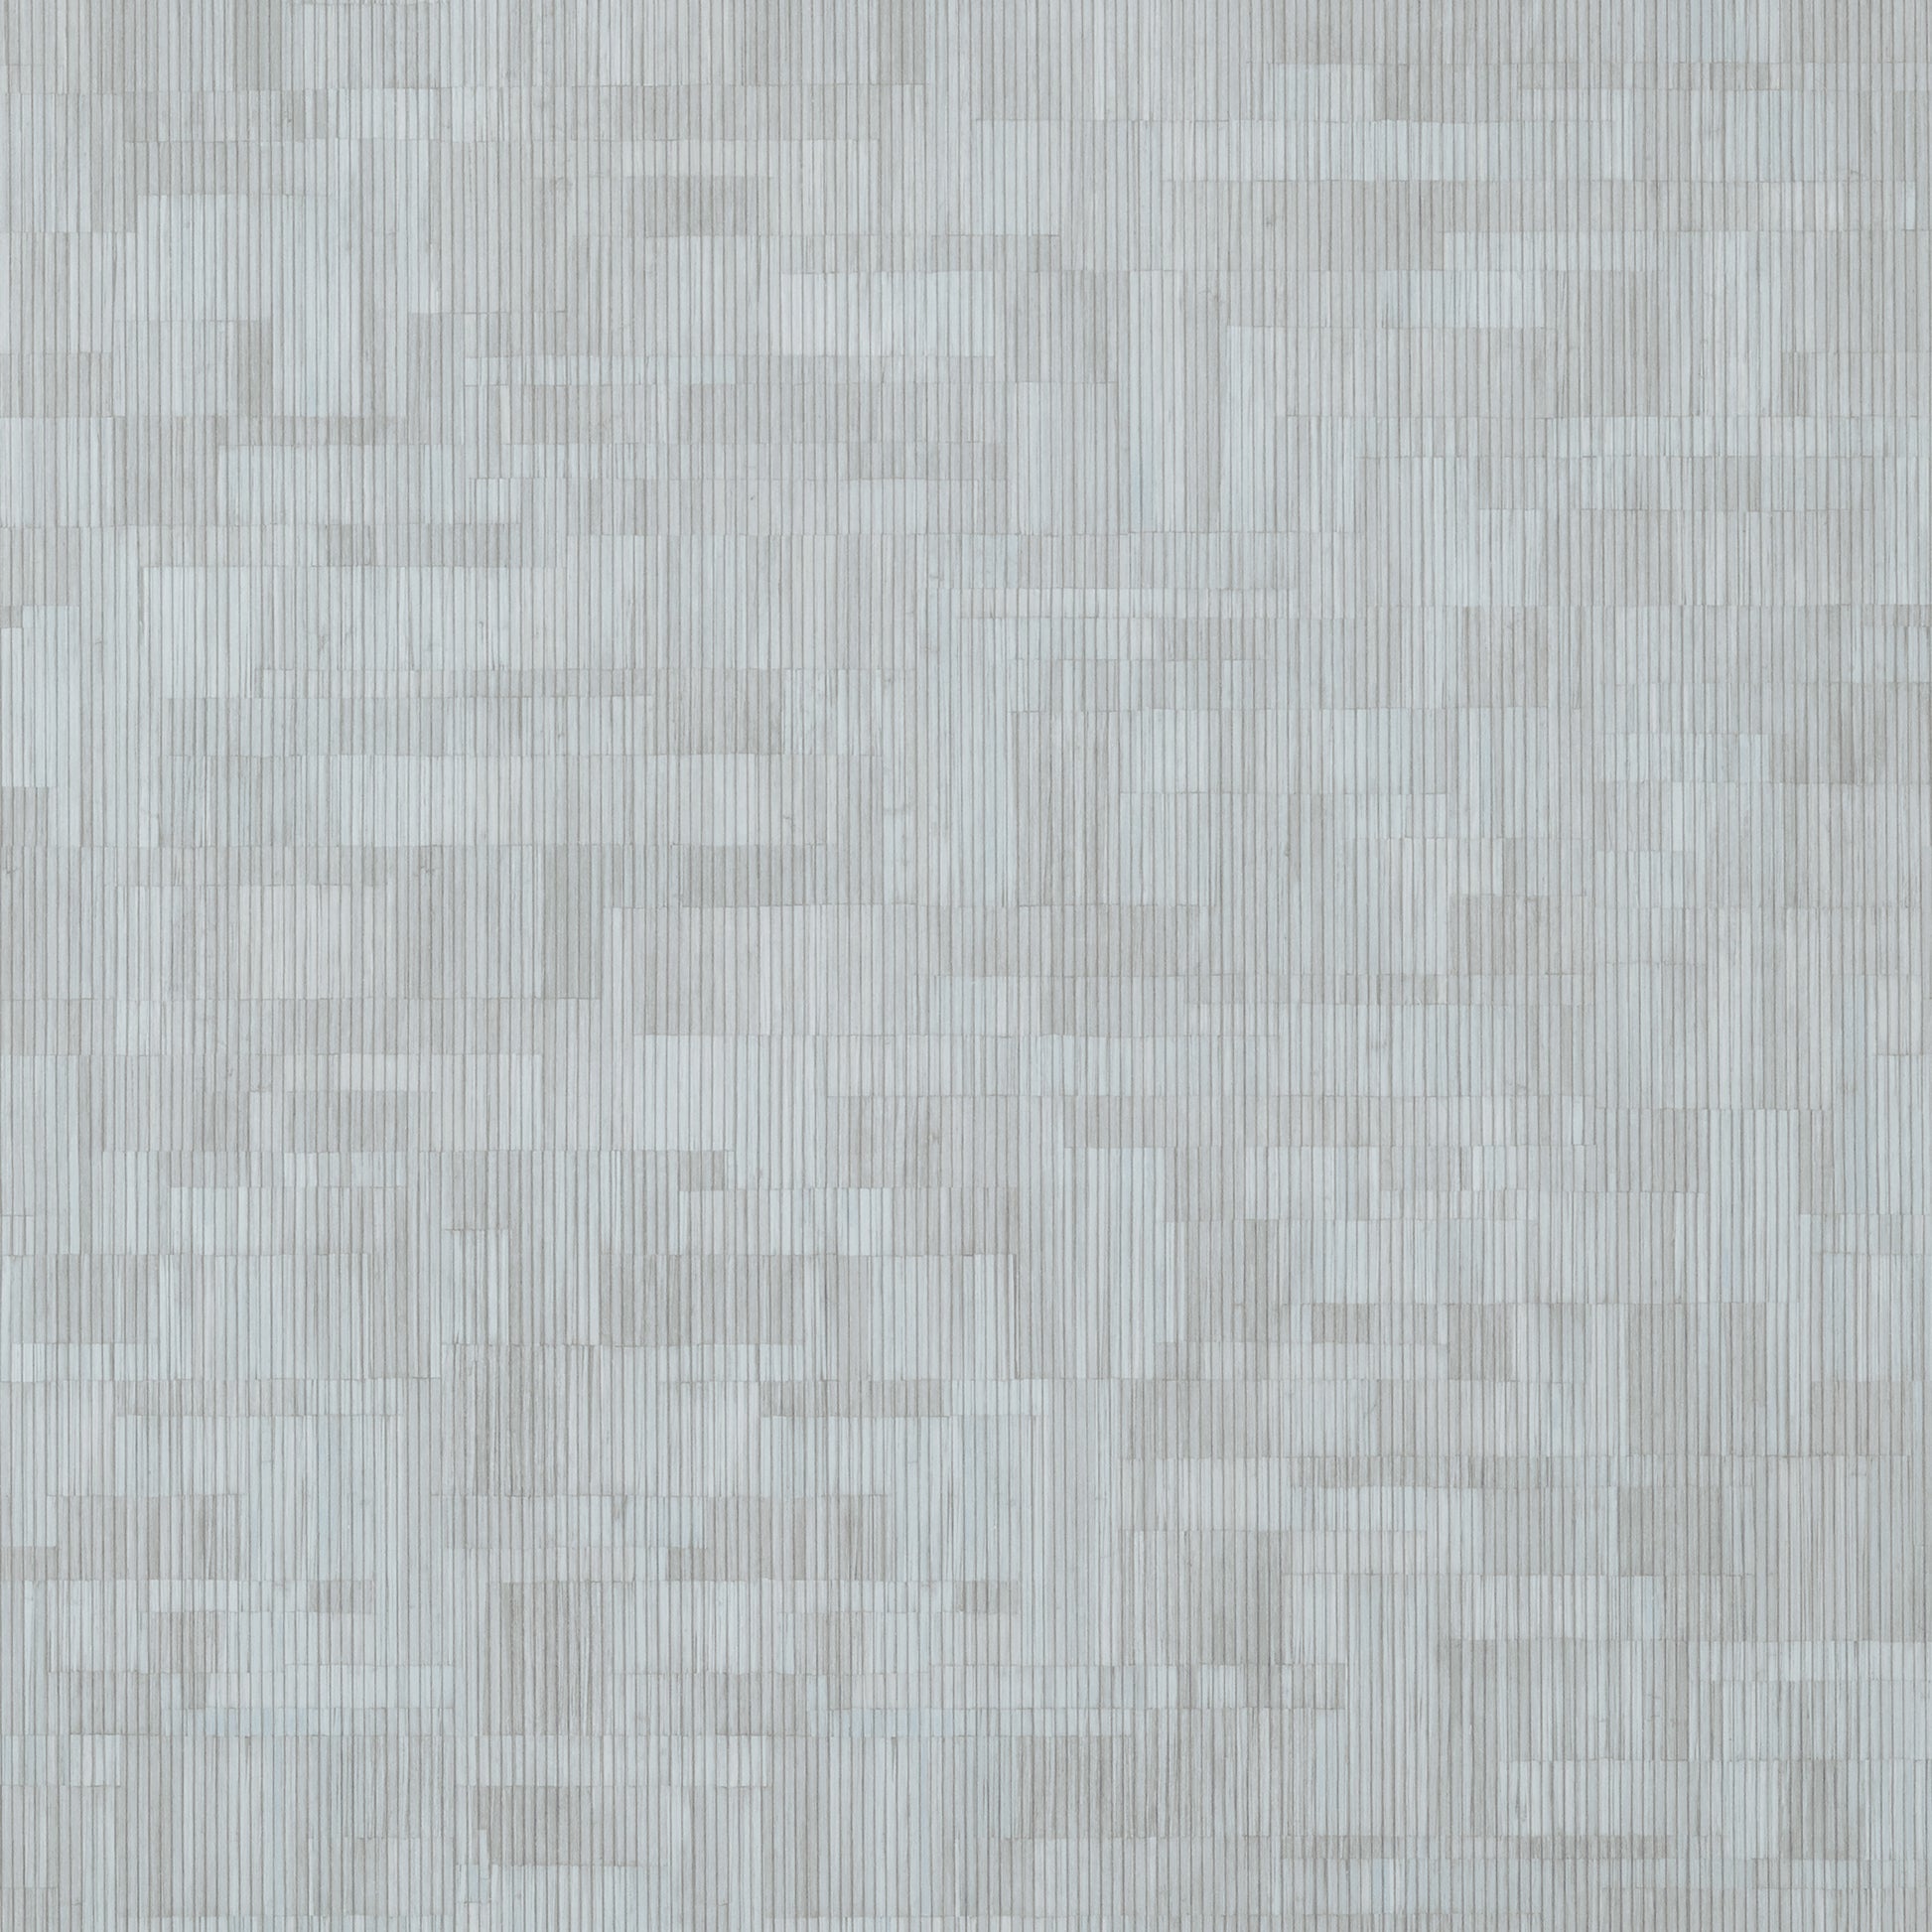 Purchase Thibaut Wallpaper Product# T41023 pattern name Bamboo Mosaic color Charcoal. 